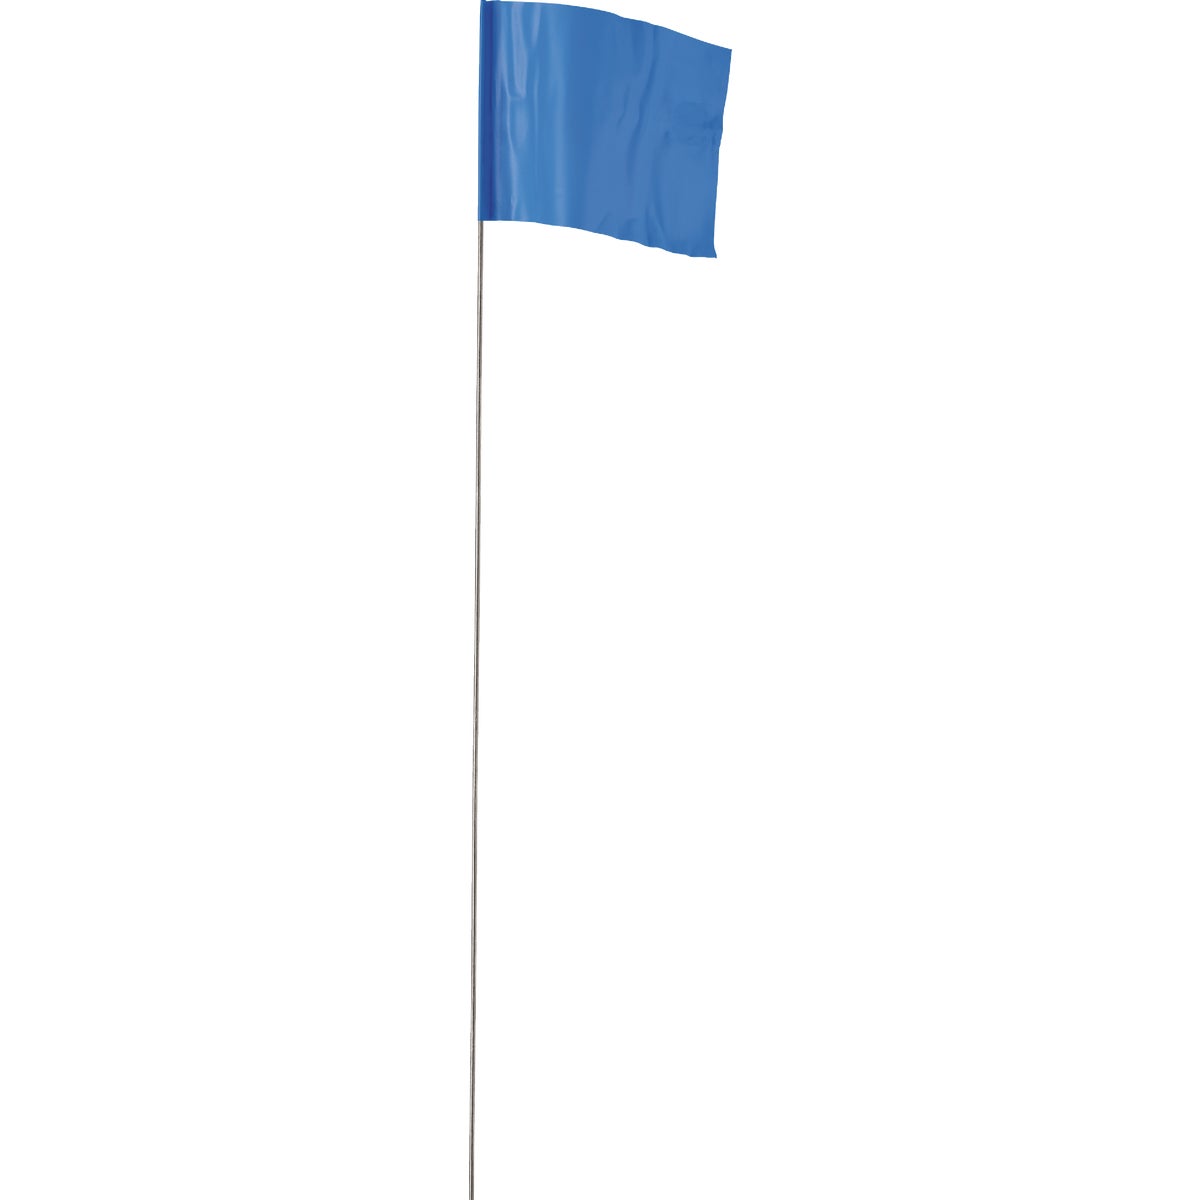 Item 352772, Marking flags on a steel wire stake.